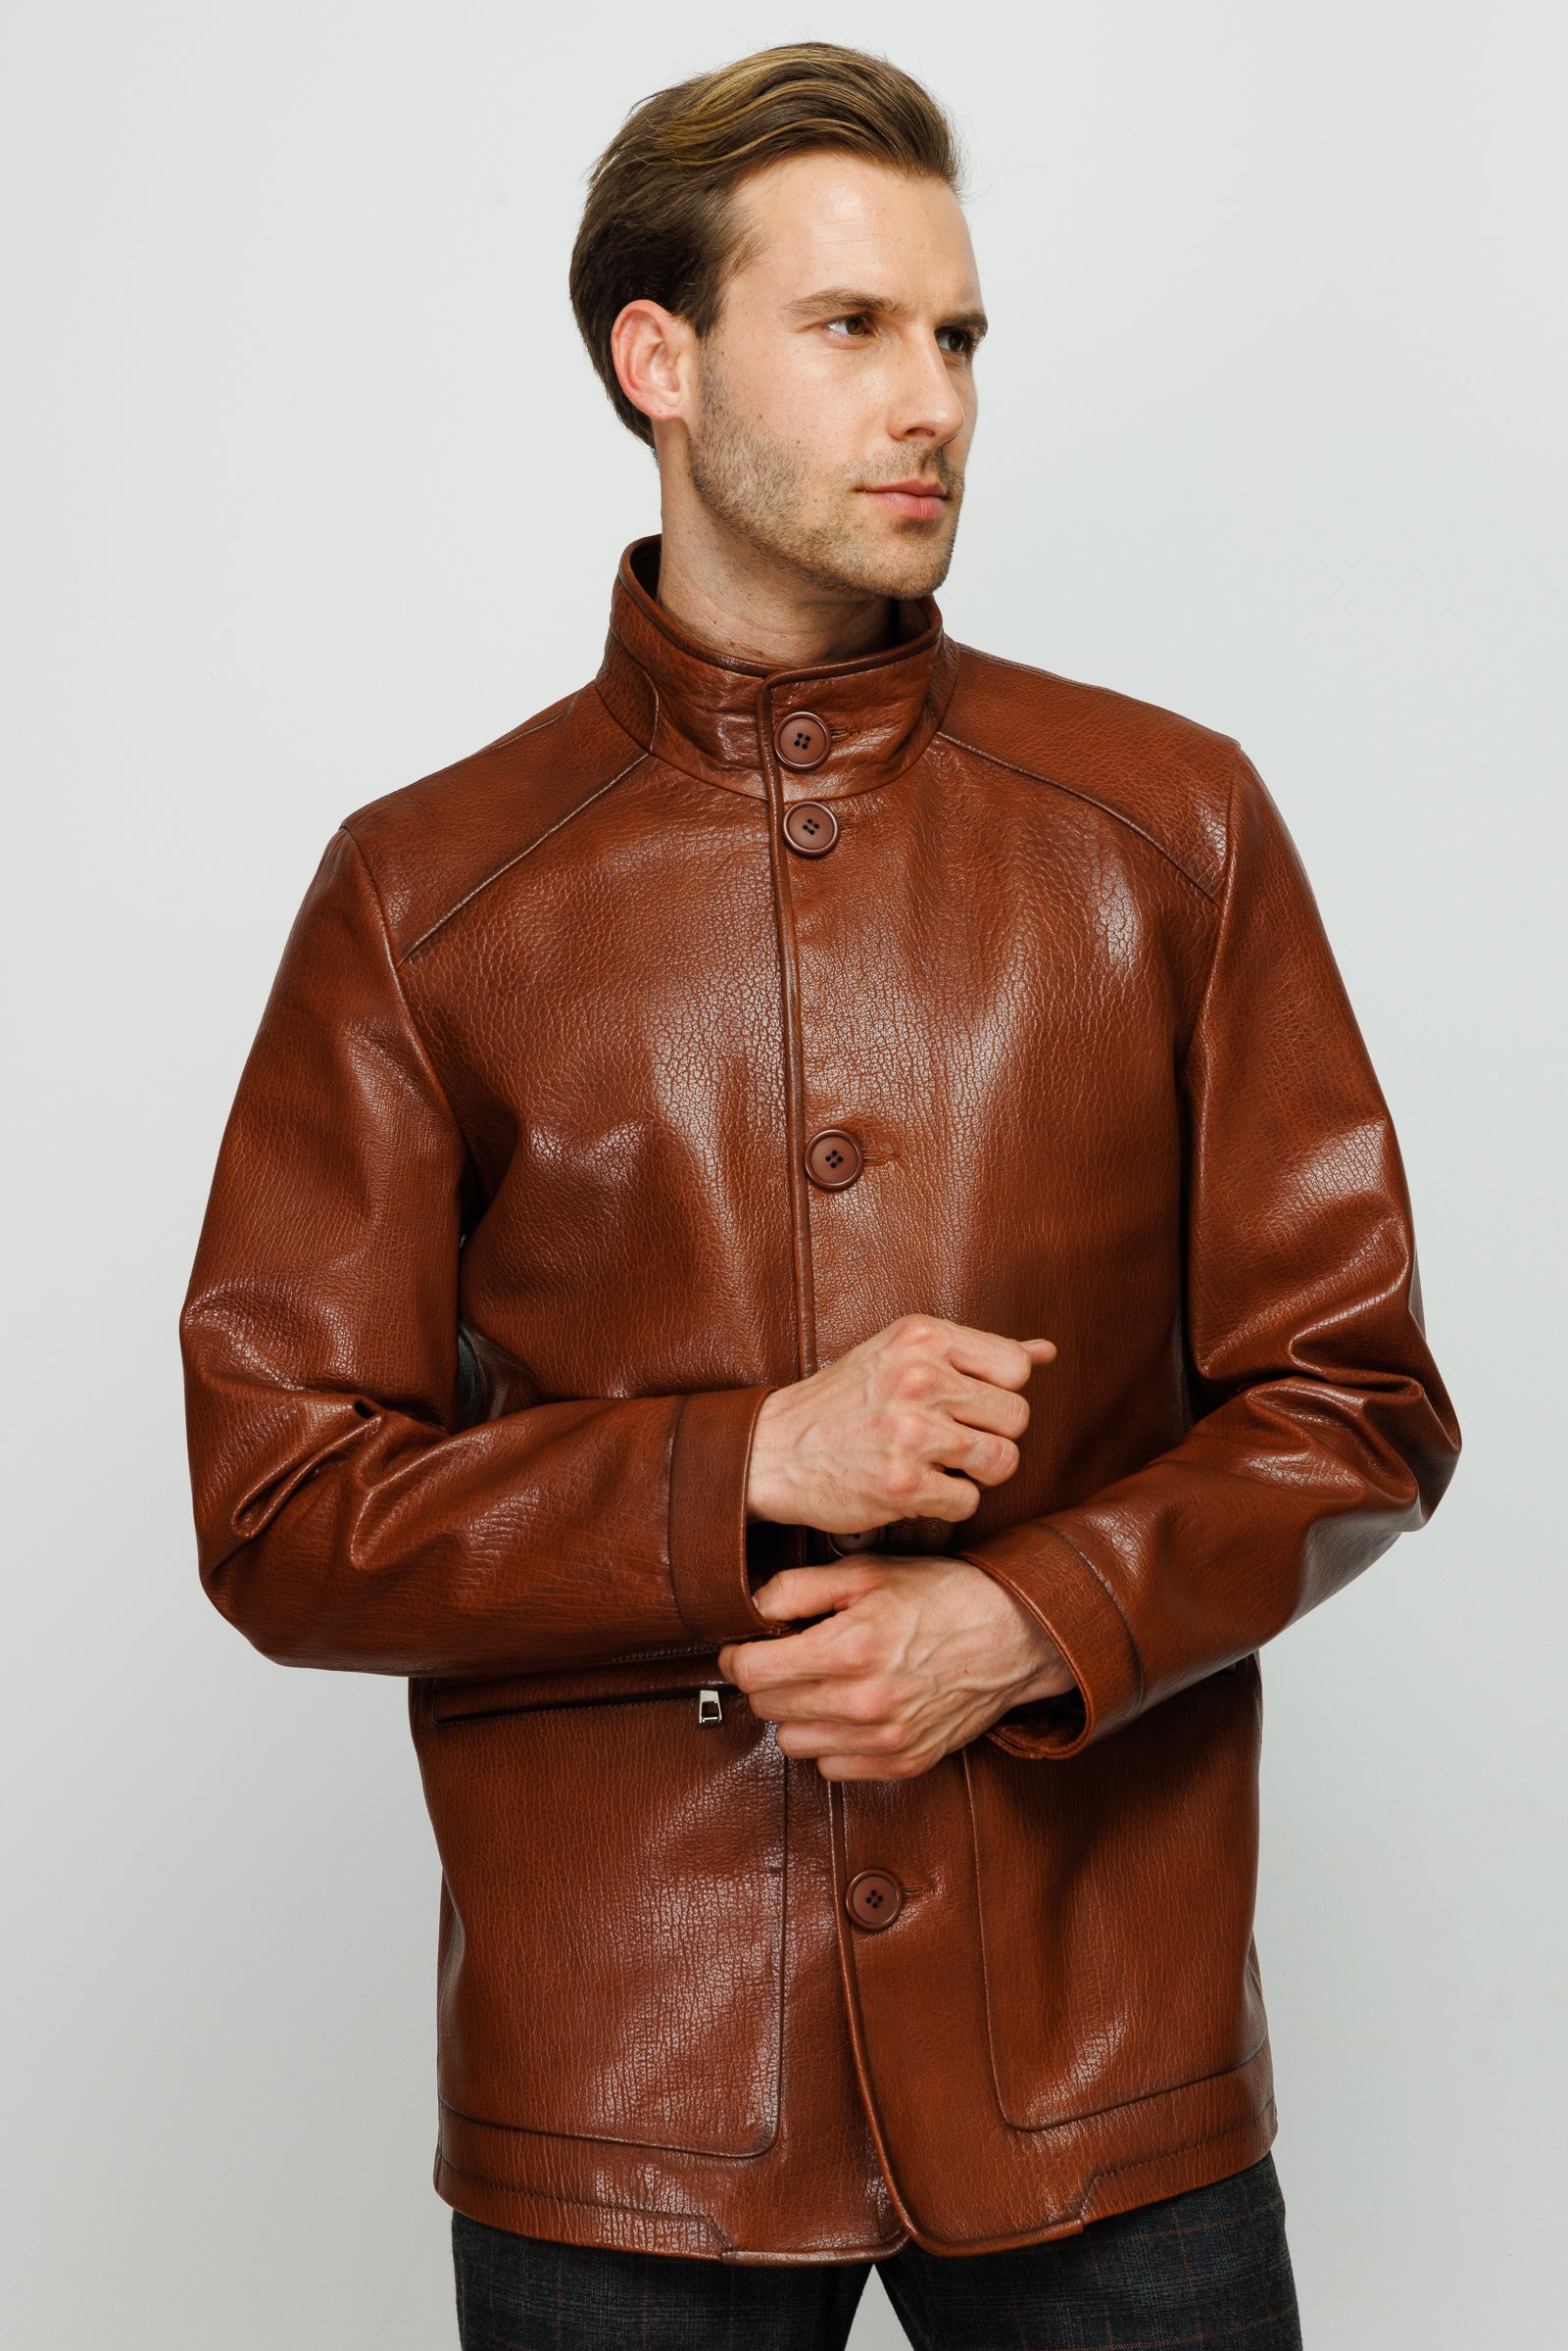 The Barclay Brown Leather Men Jacket